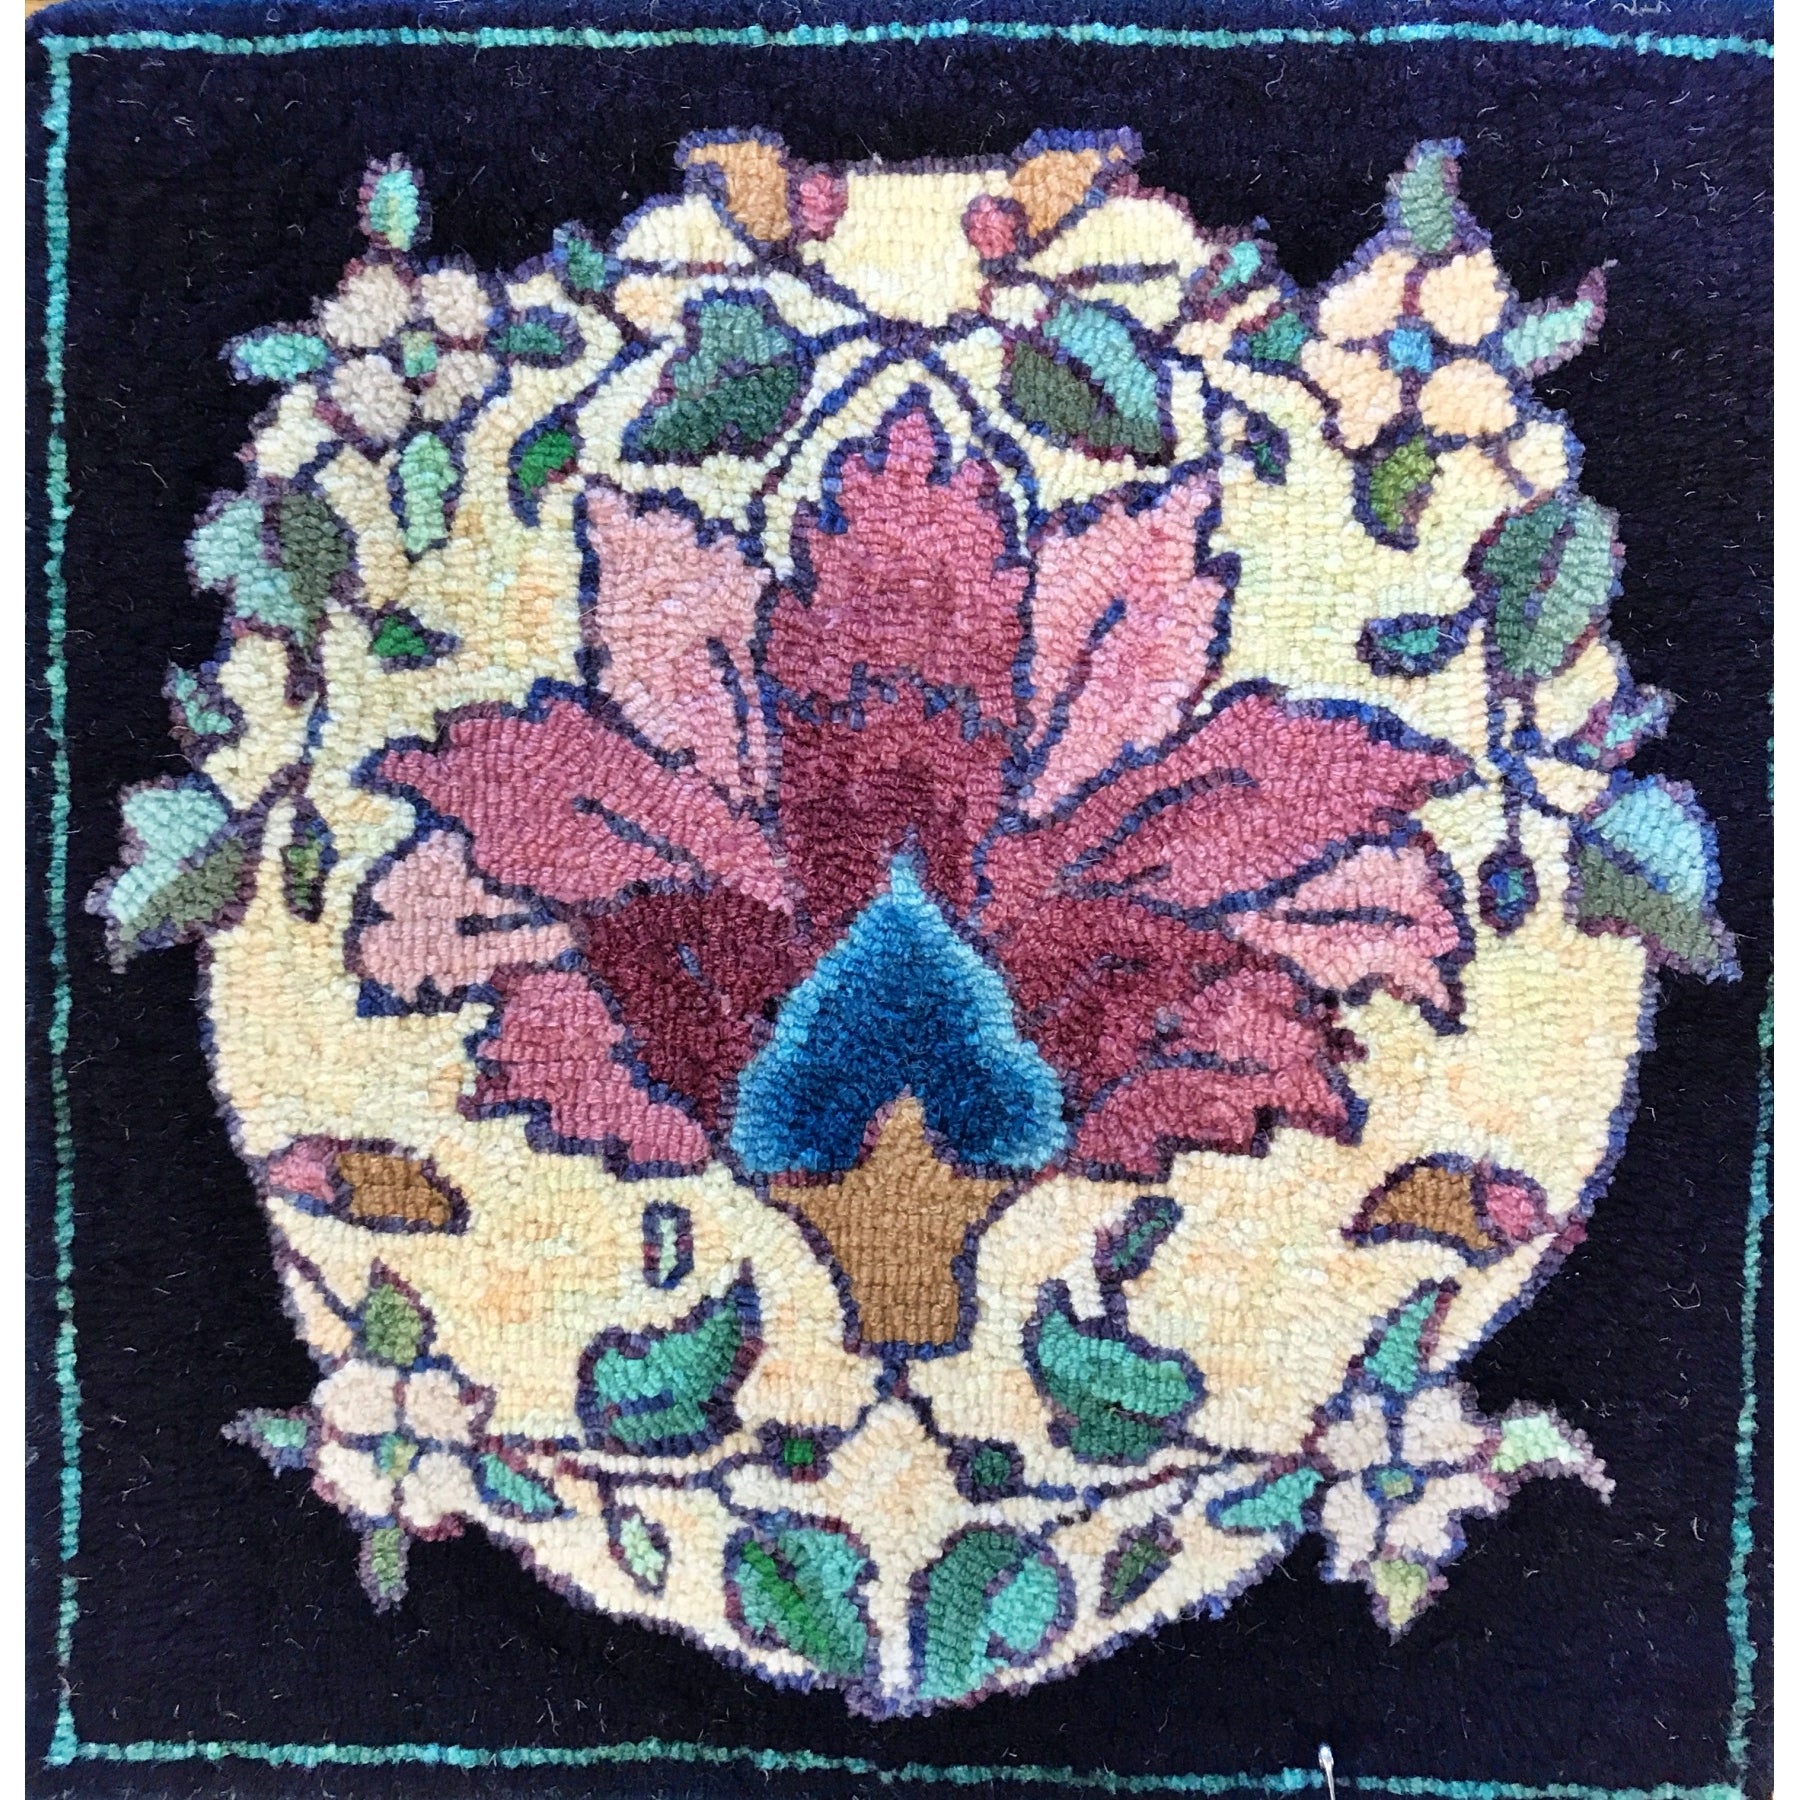 Collinot, rug hooked by Polly Clark